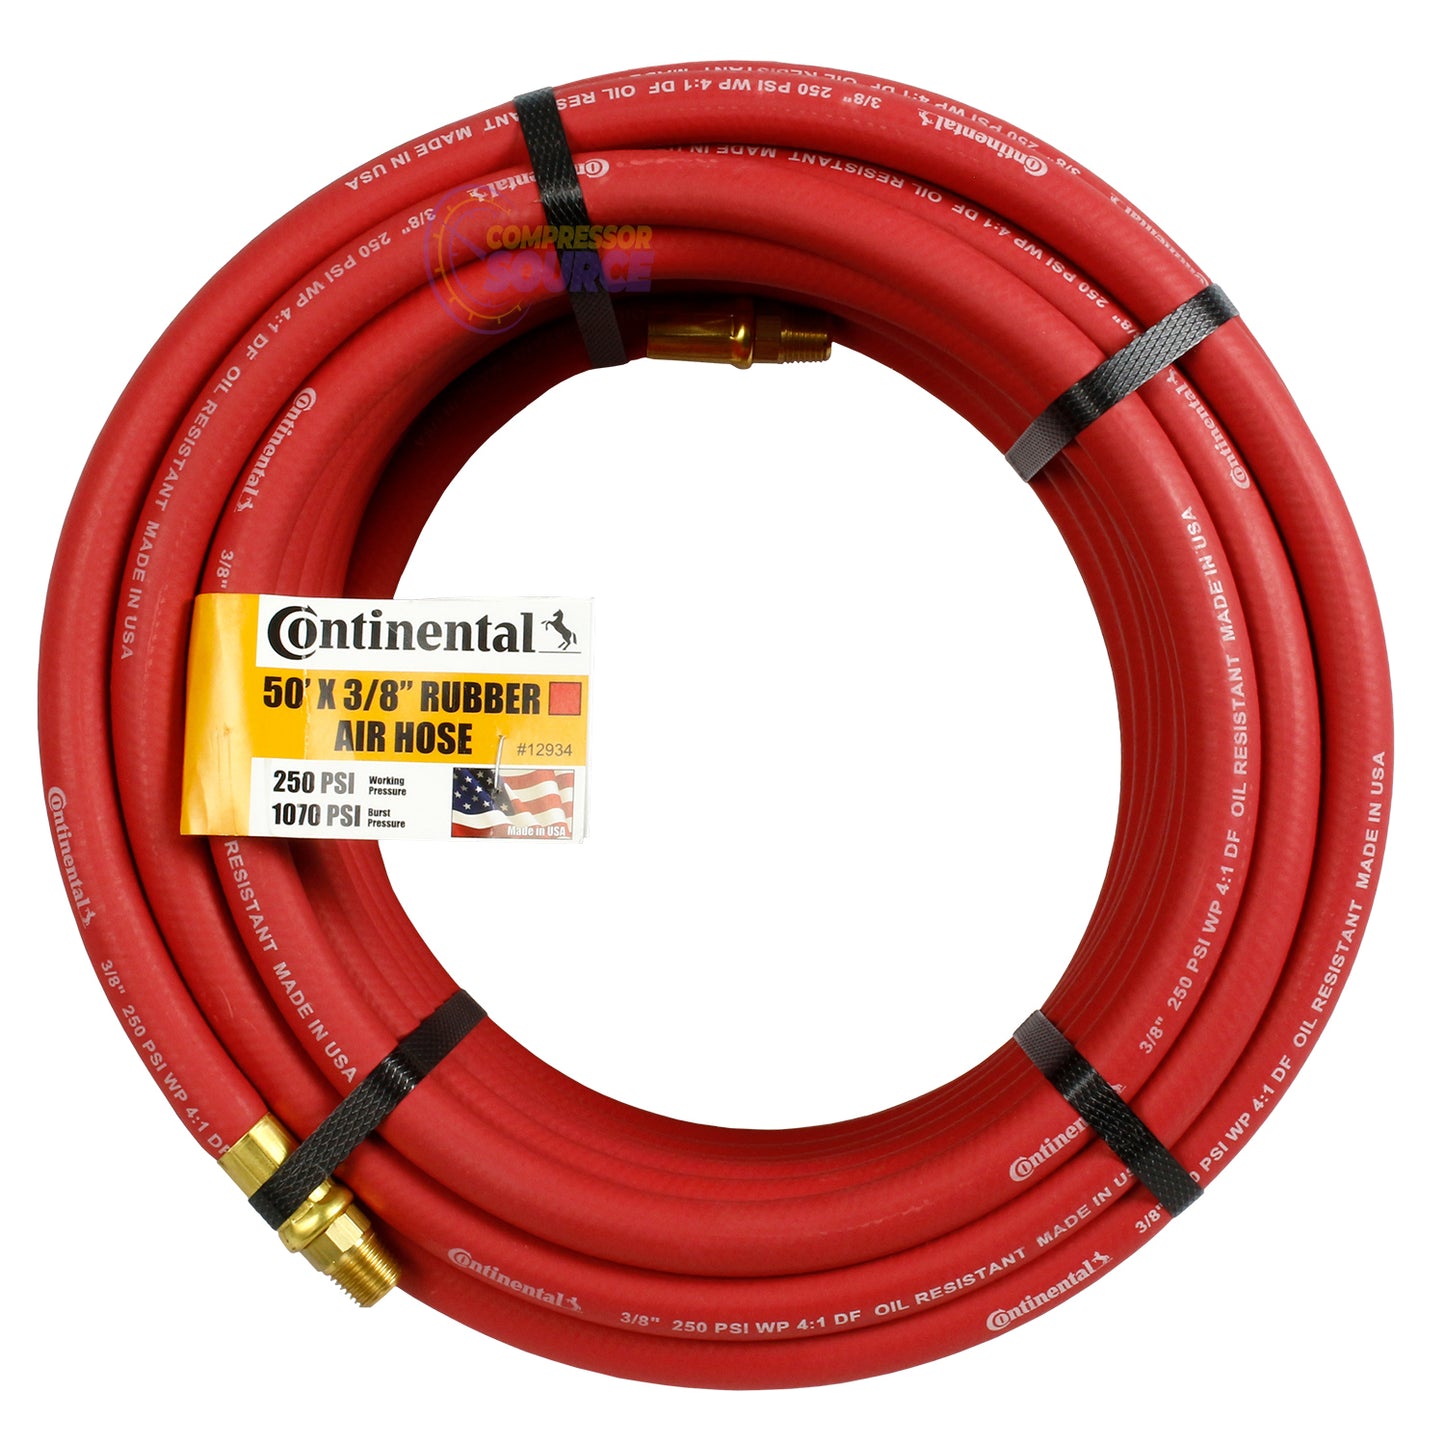 Continental Compressor Air Hose 50ft x 3/8in 250 PSI Oil-Resistant